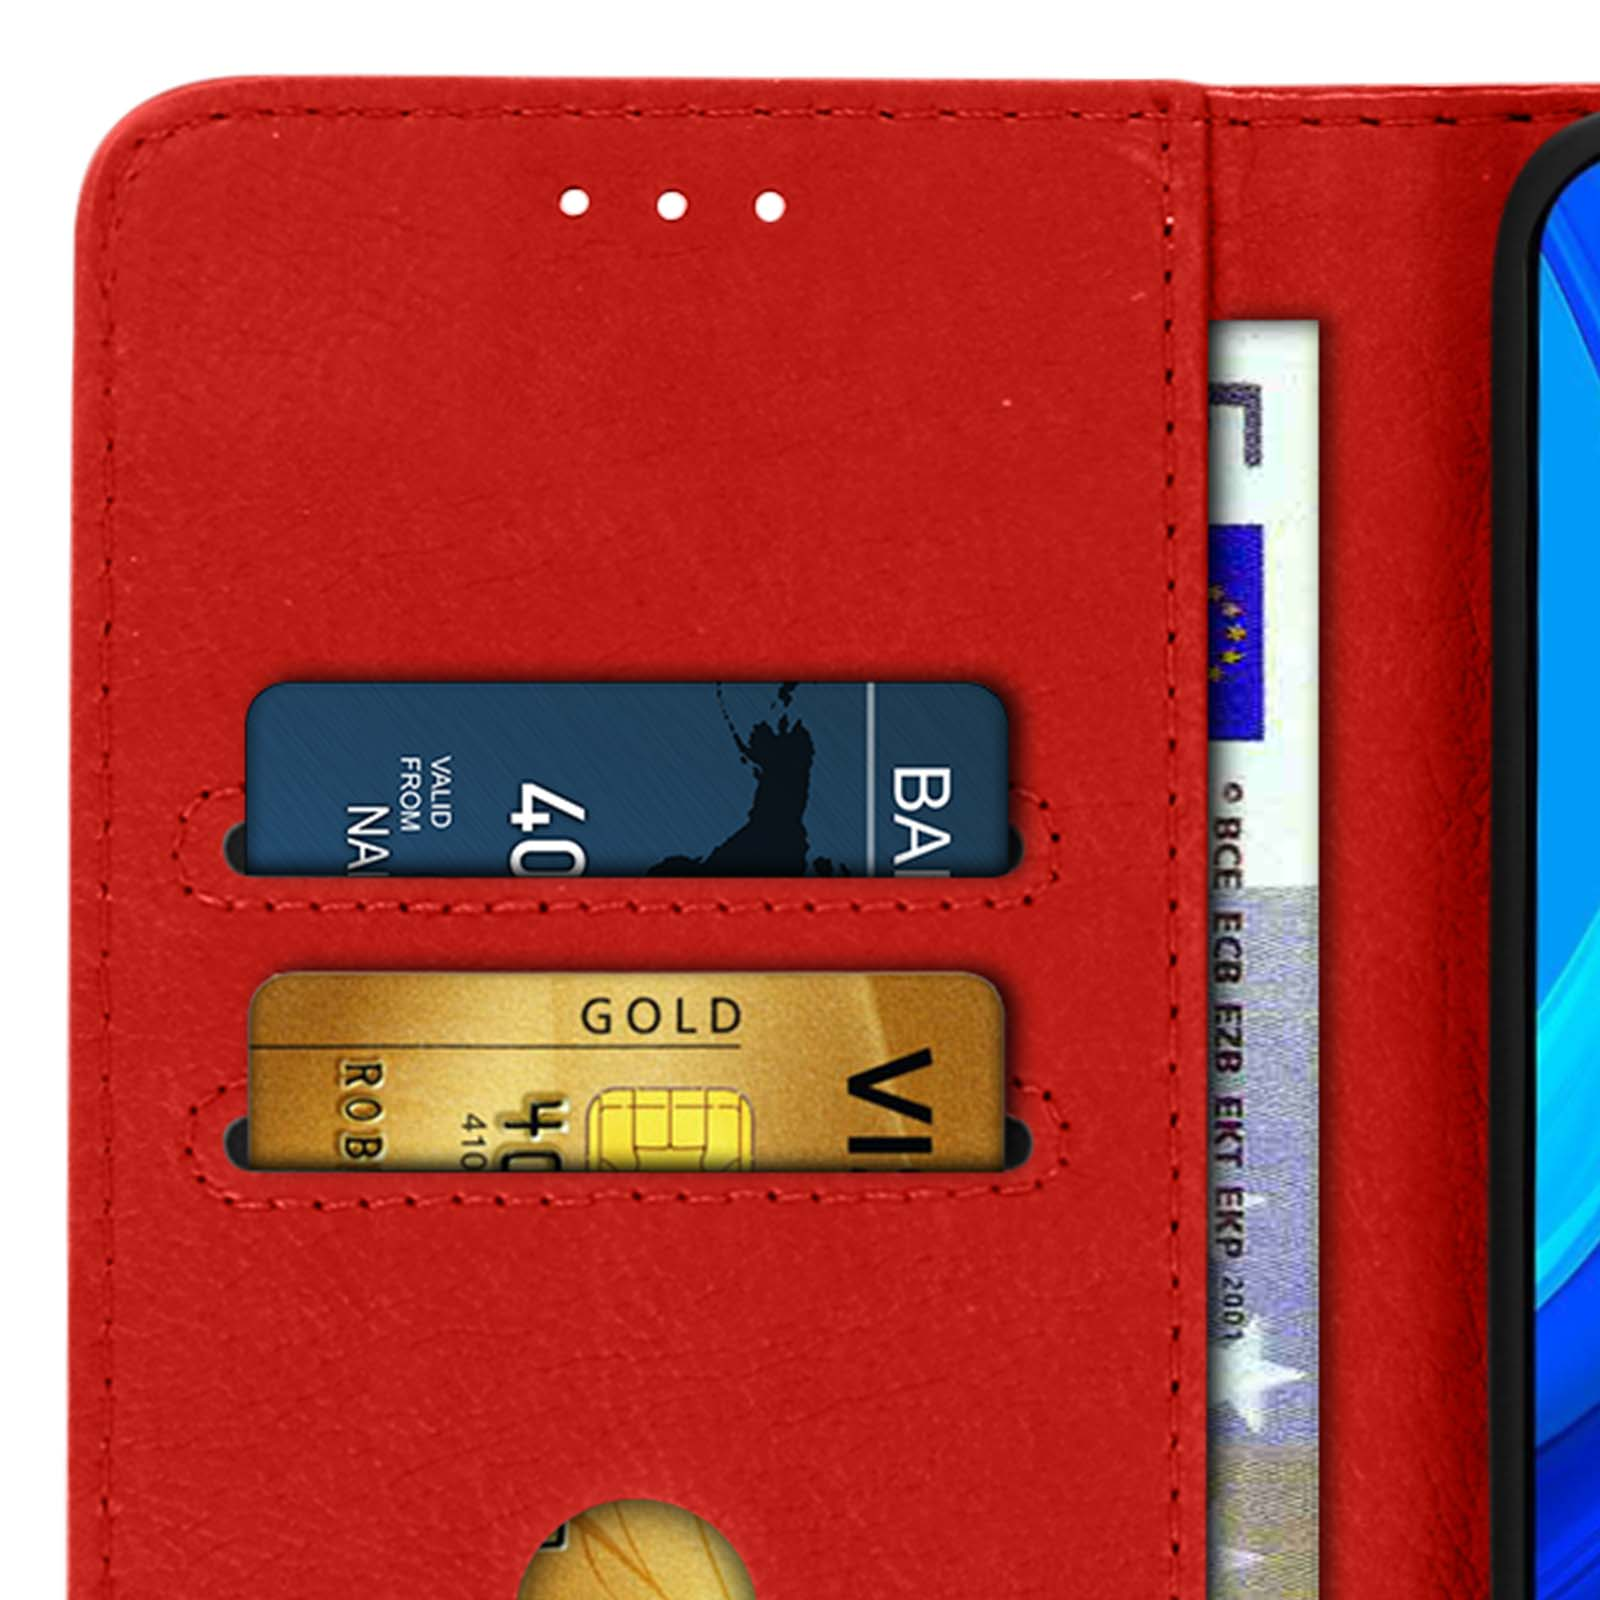 Series, Bookcover, AVIZAR P 2020, Huawei, Rot Chesterfield smart